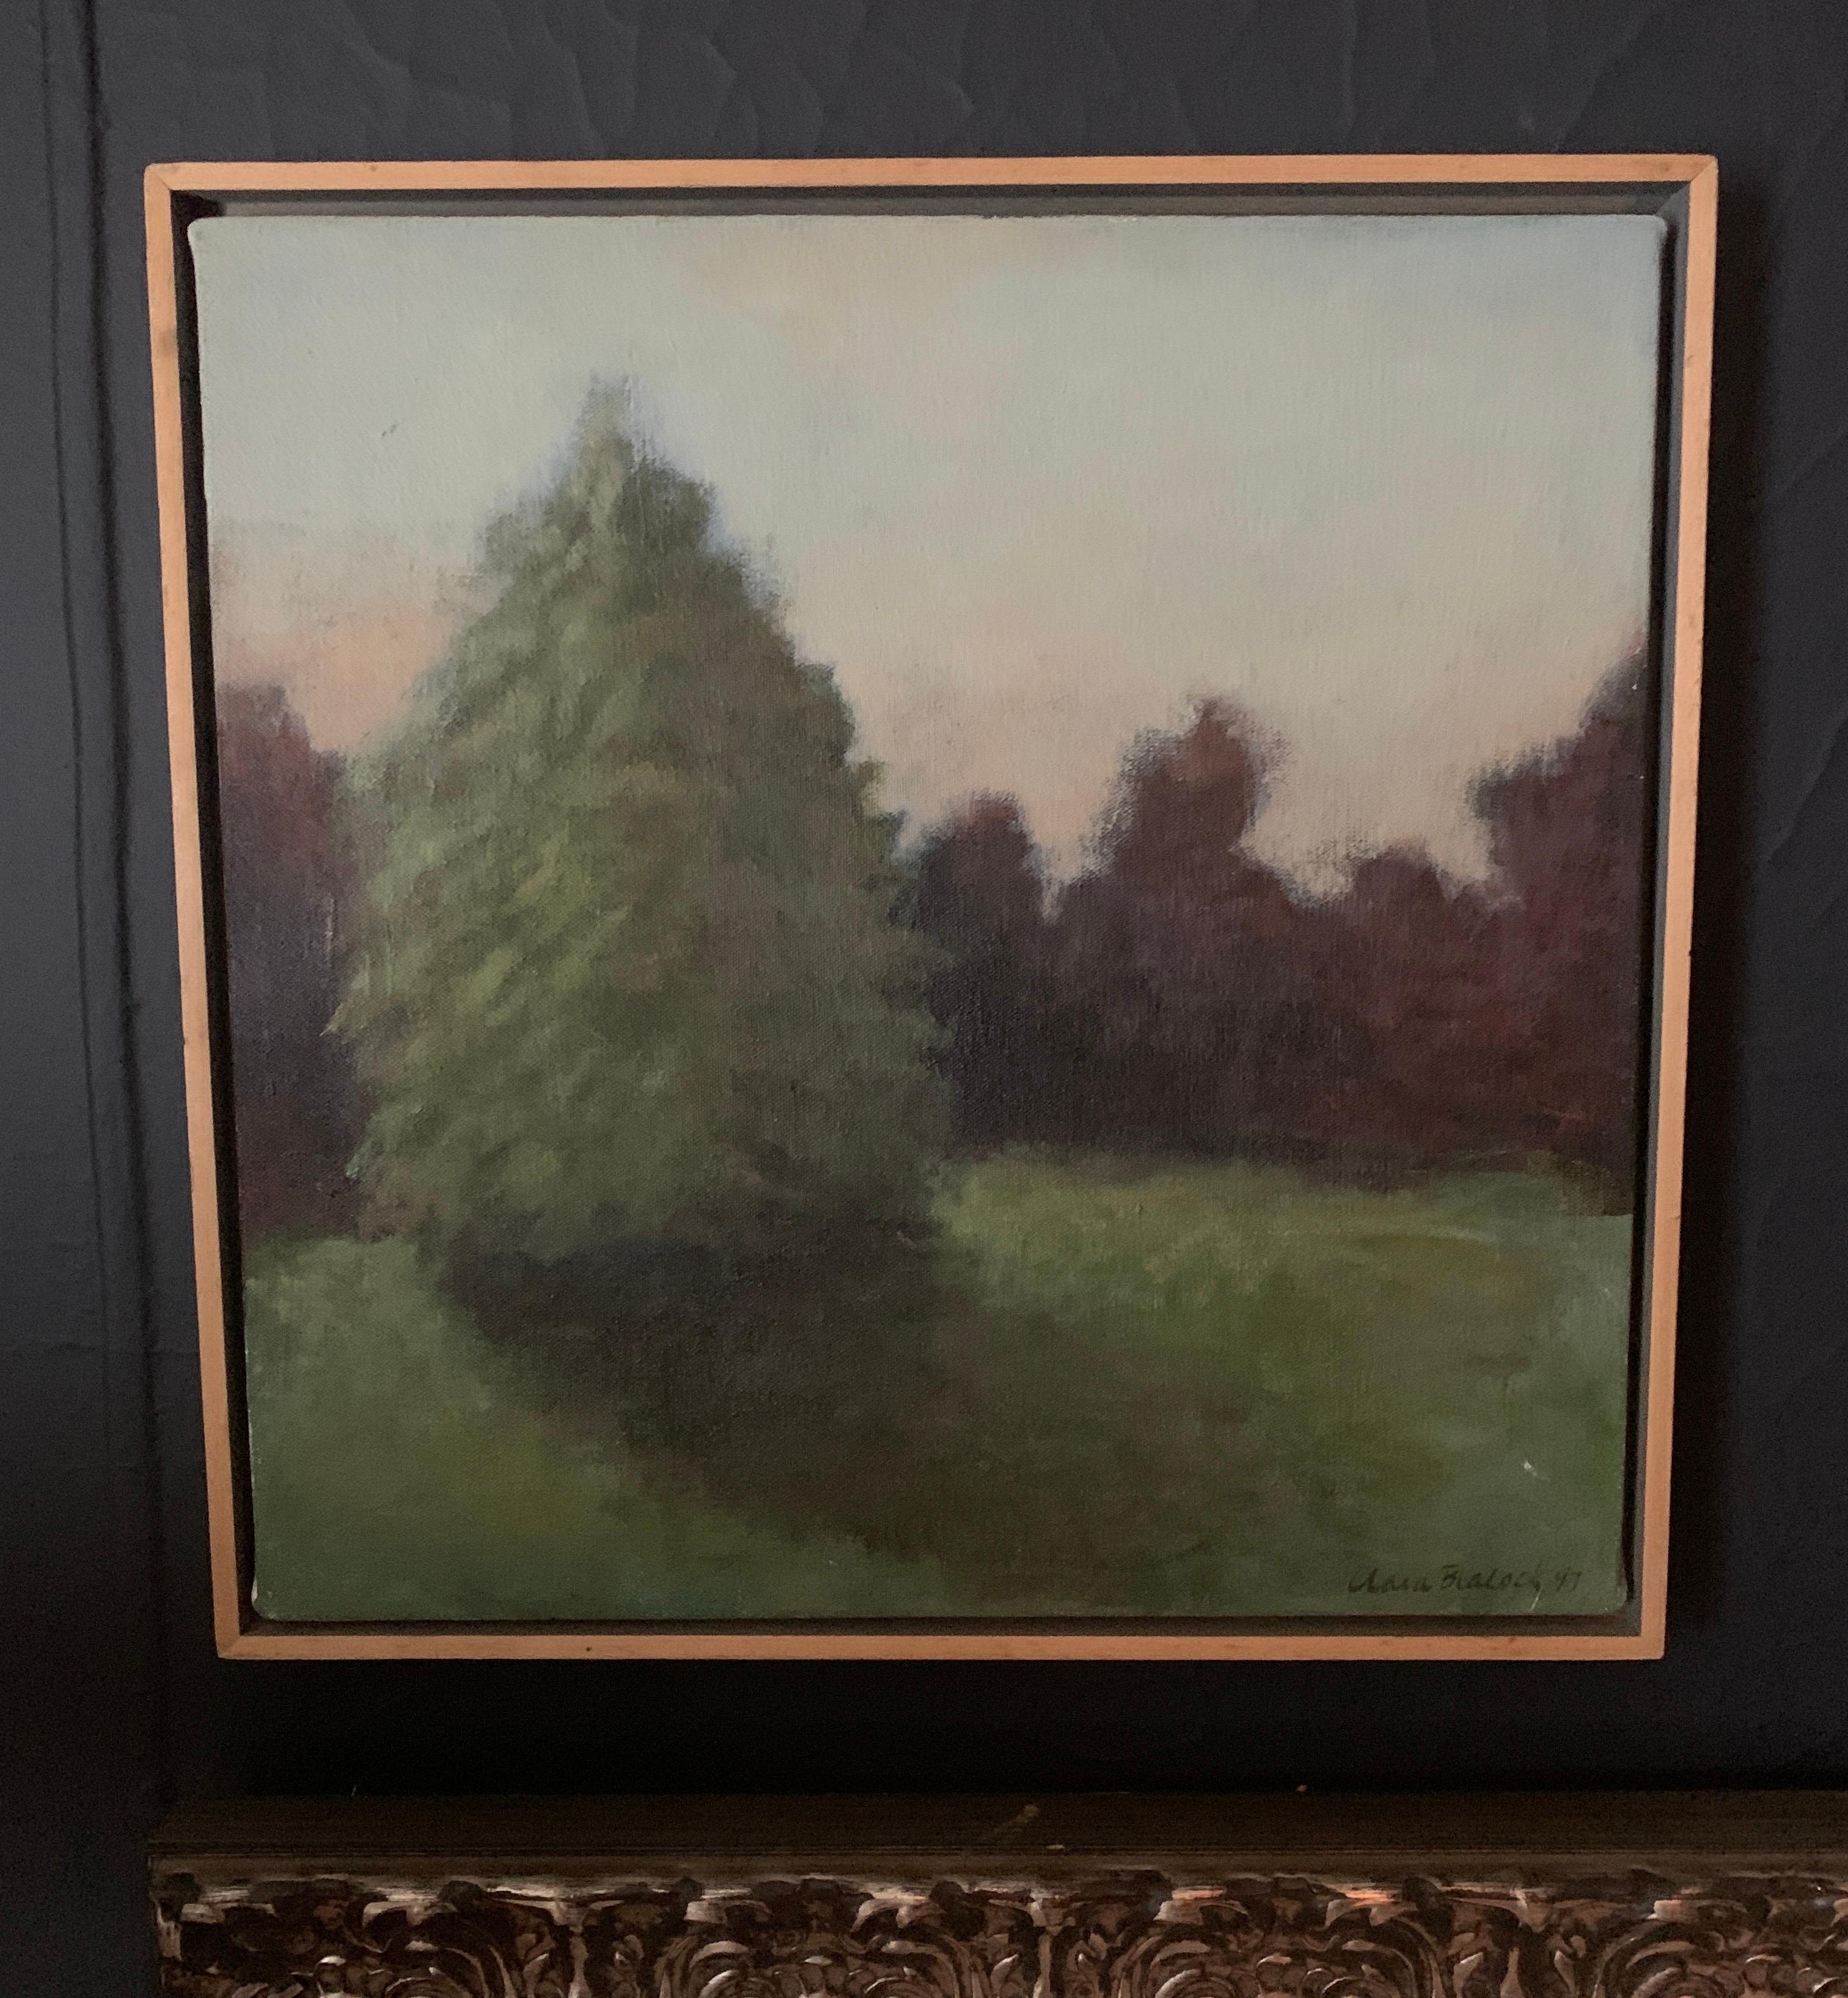 Trees on a horizon in green hues with shadow and neutral sky. Acrylic on Canvas. Art work is set in a wood frame.

Paintings of this genre are a compliment to any setting and add a sense of peace and solitude - a wonderful addition to any room,